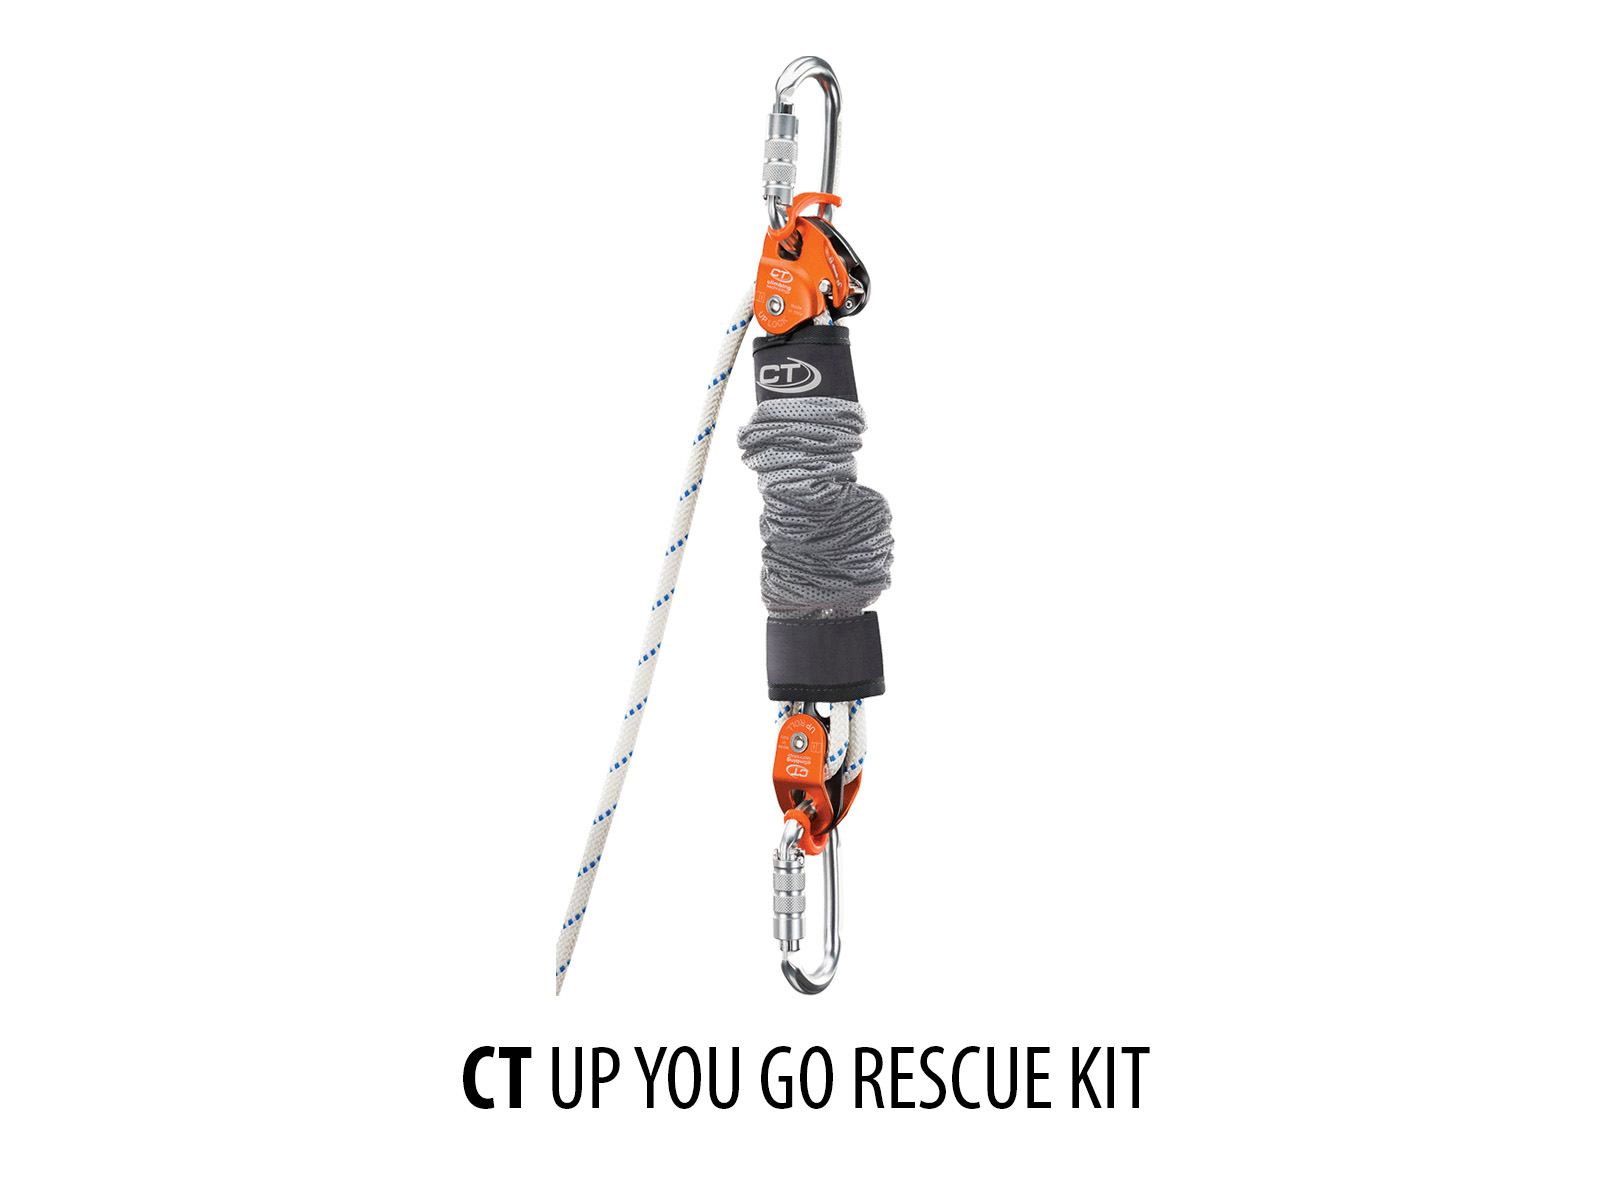 Up You Go Rescue Kit